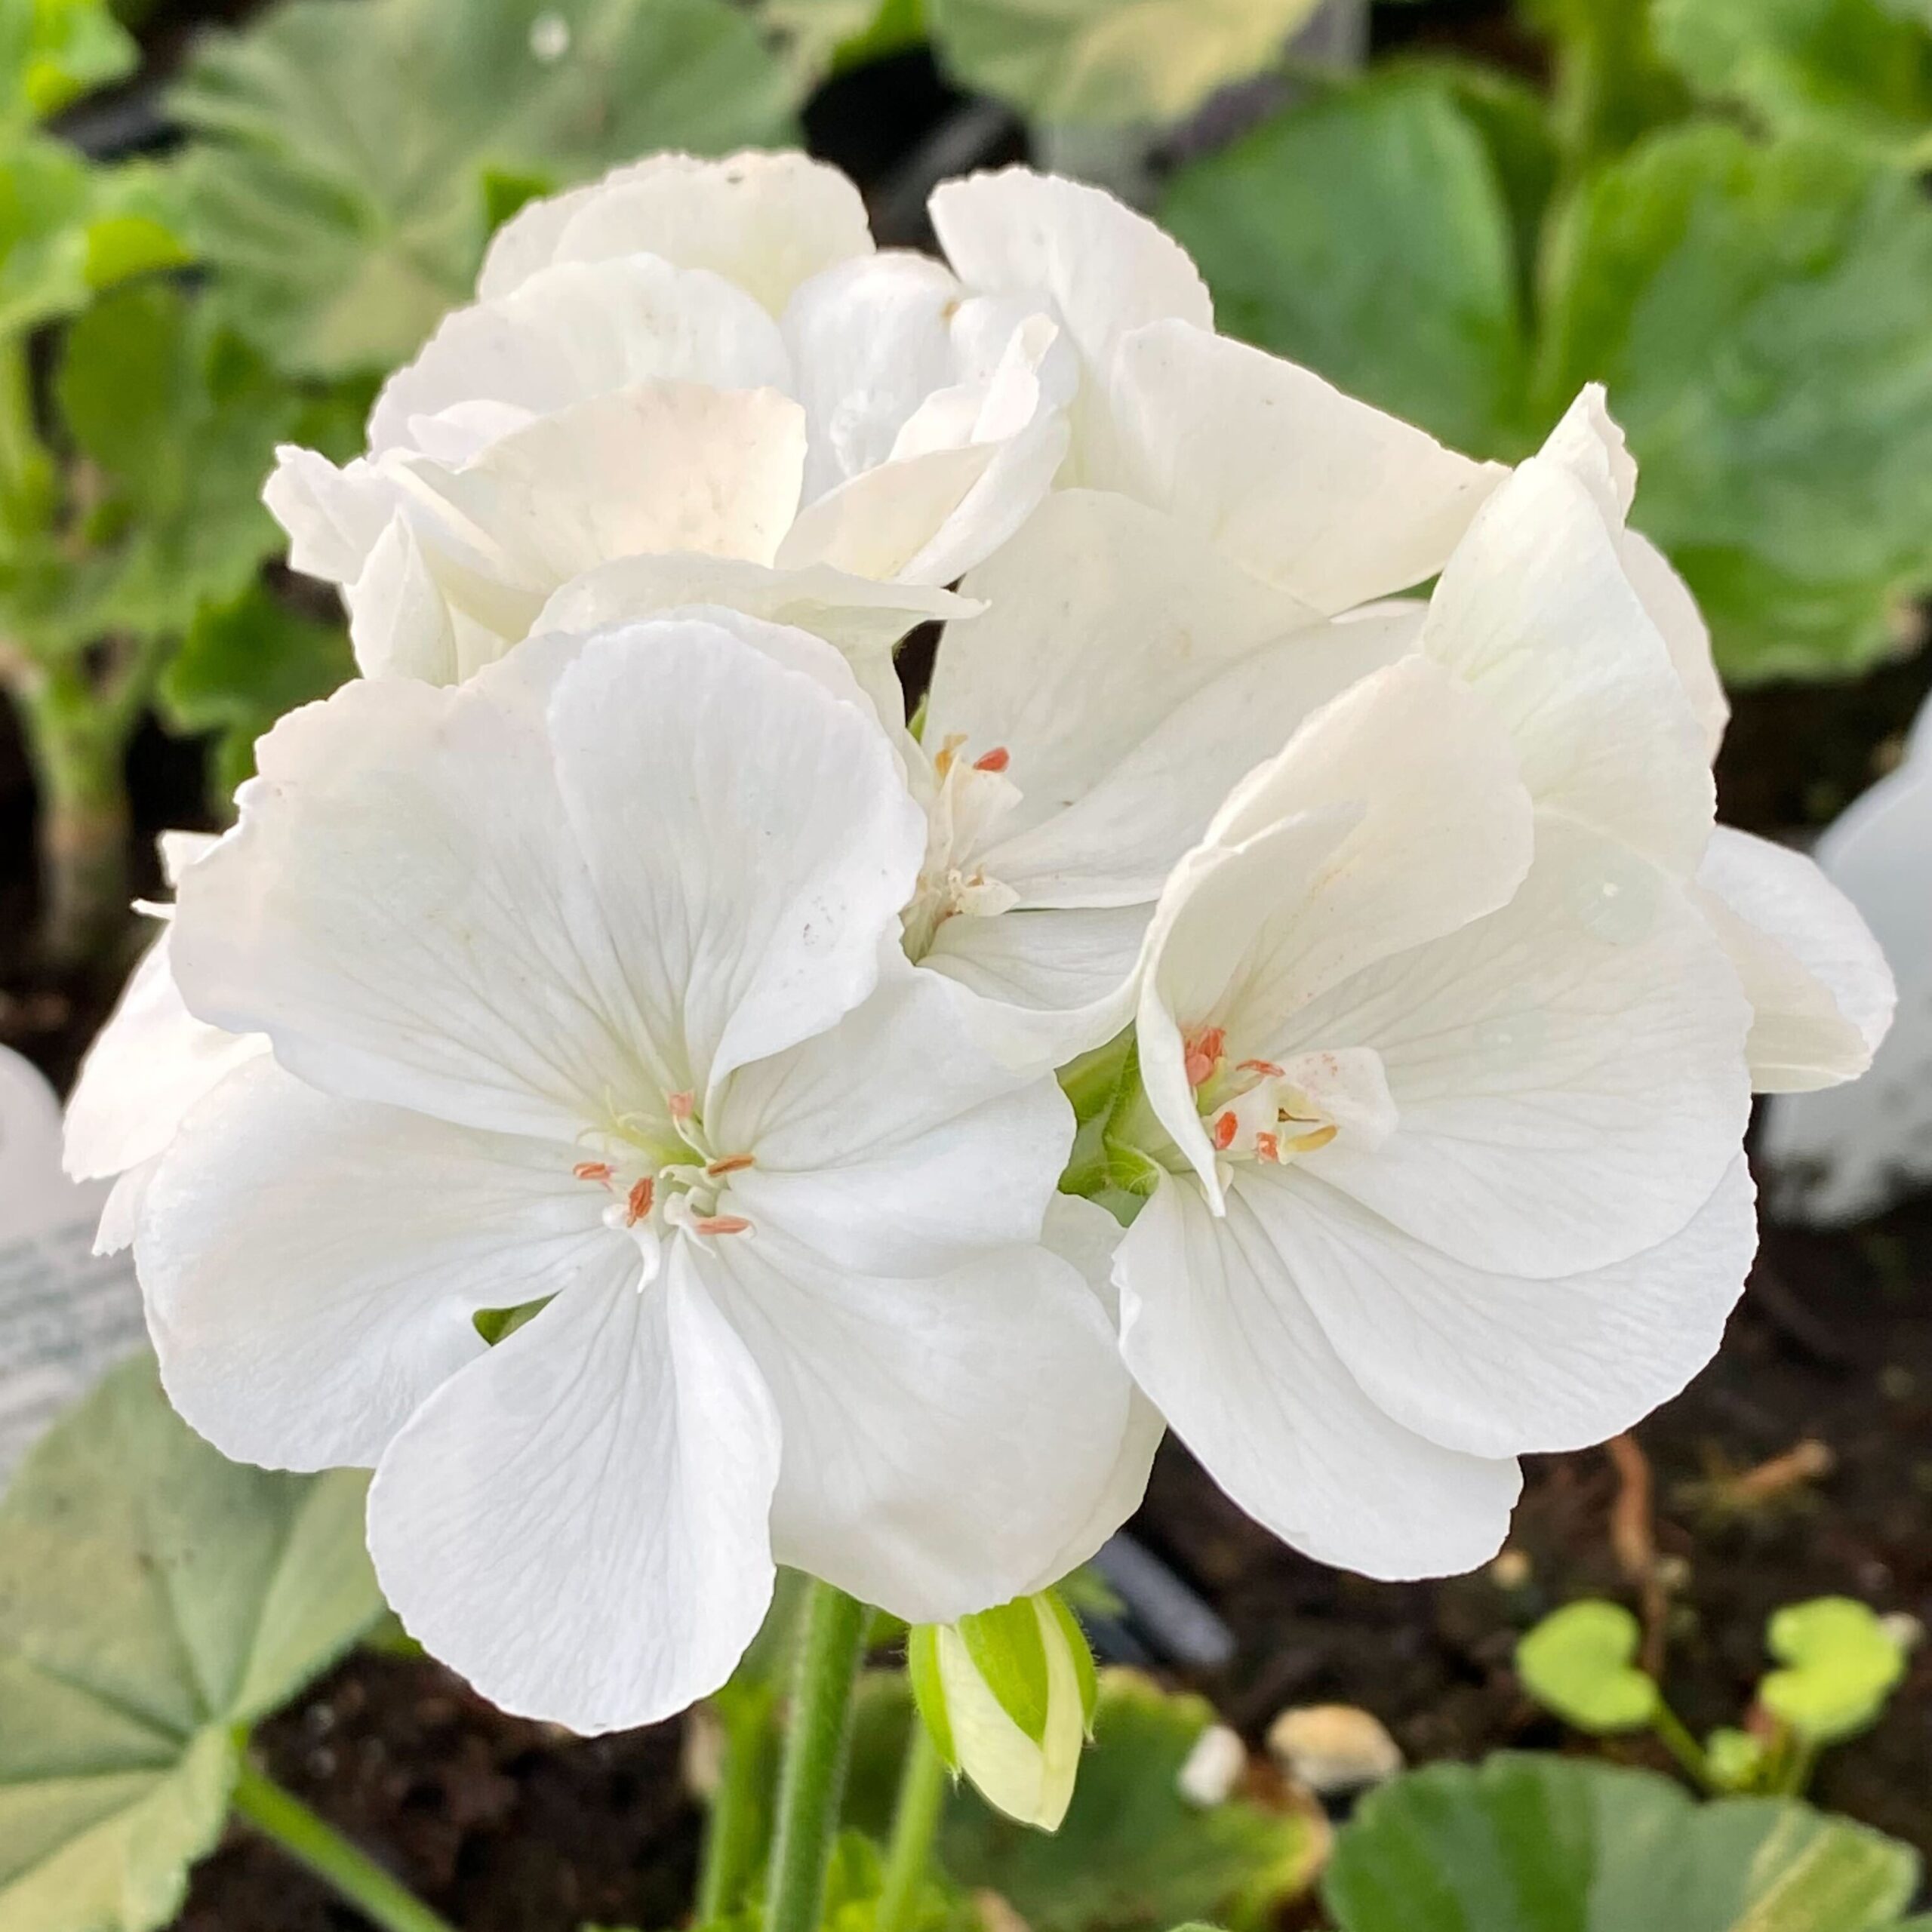 2022 Greenstreet Growers Wholesale Availability Landscaping Finished Annuals Dynamo Geranium White